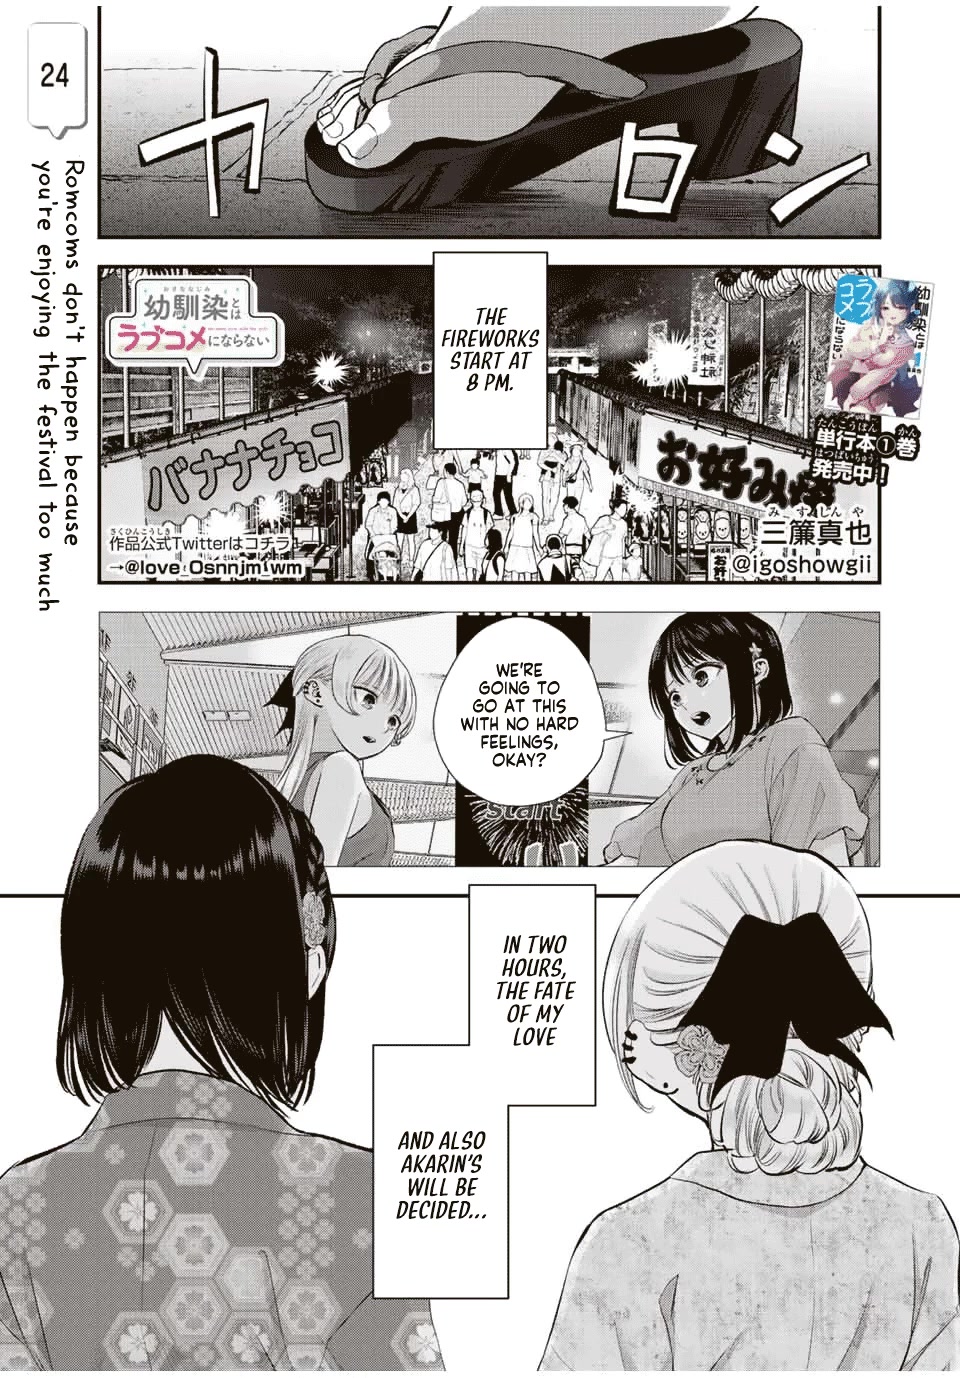 No More Love With the Girls - chapter 24 - #1